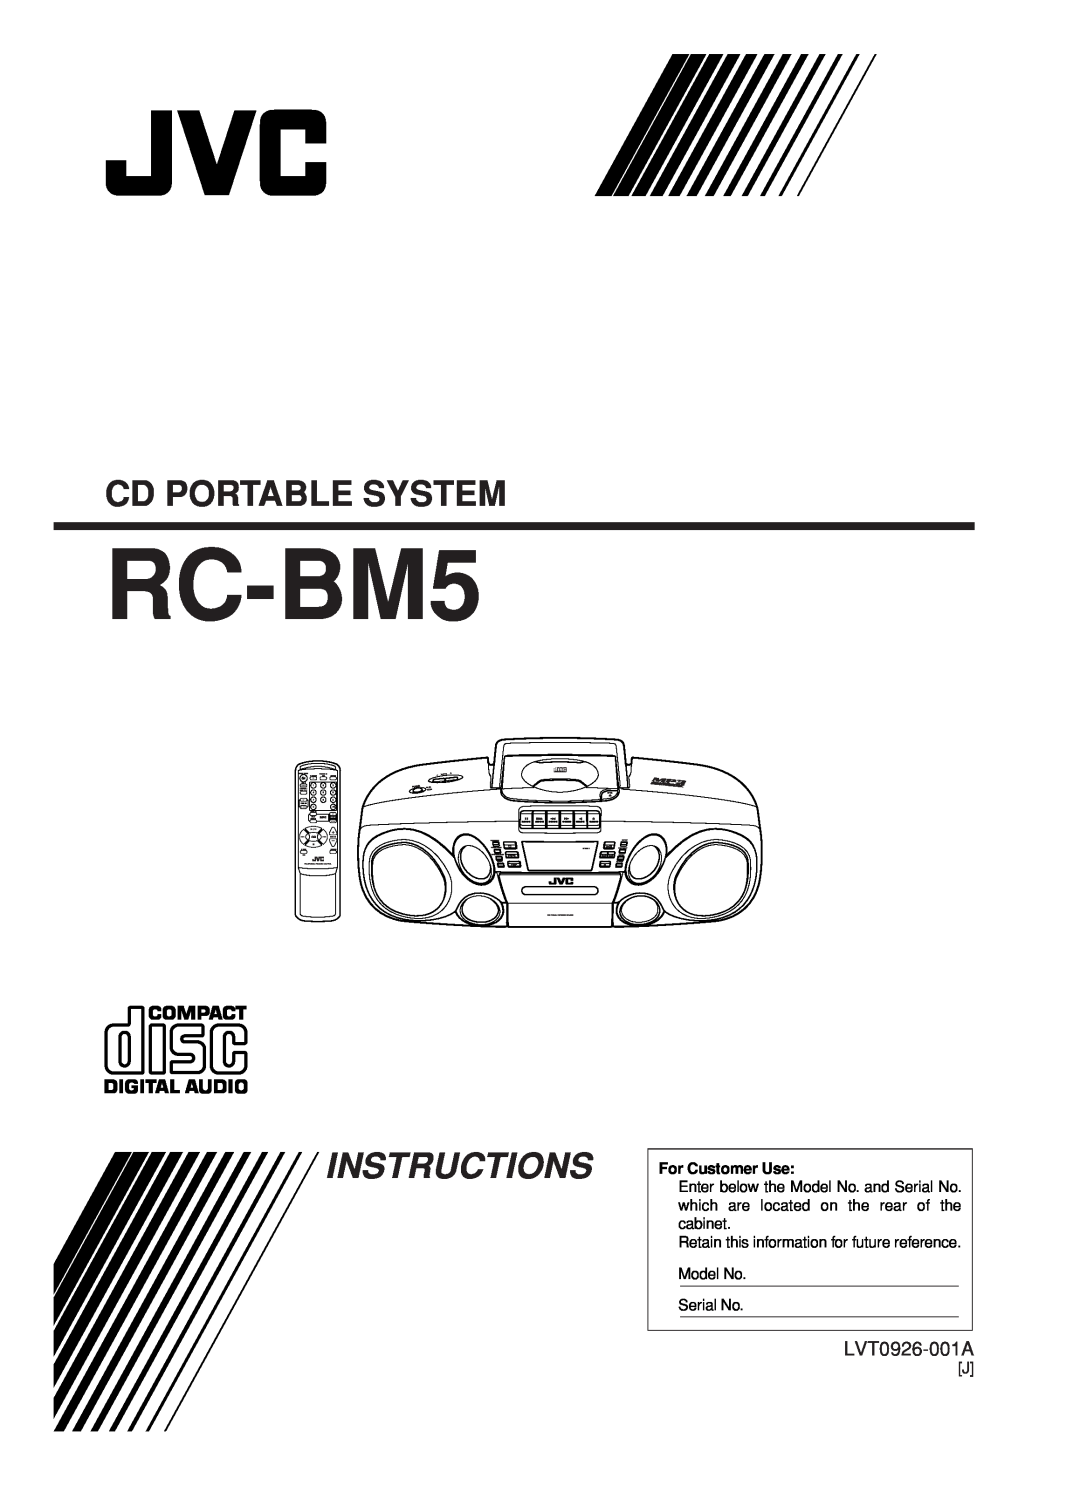 JVC RC-BM5 manual Cd Portable System, Instructions, LVT0926-003A, For Customer Use, Tuner, Tape 